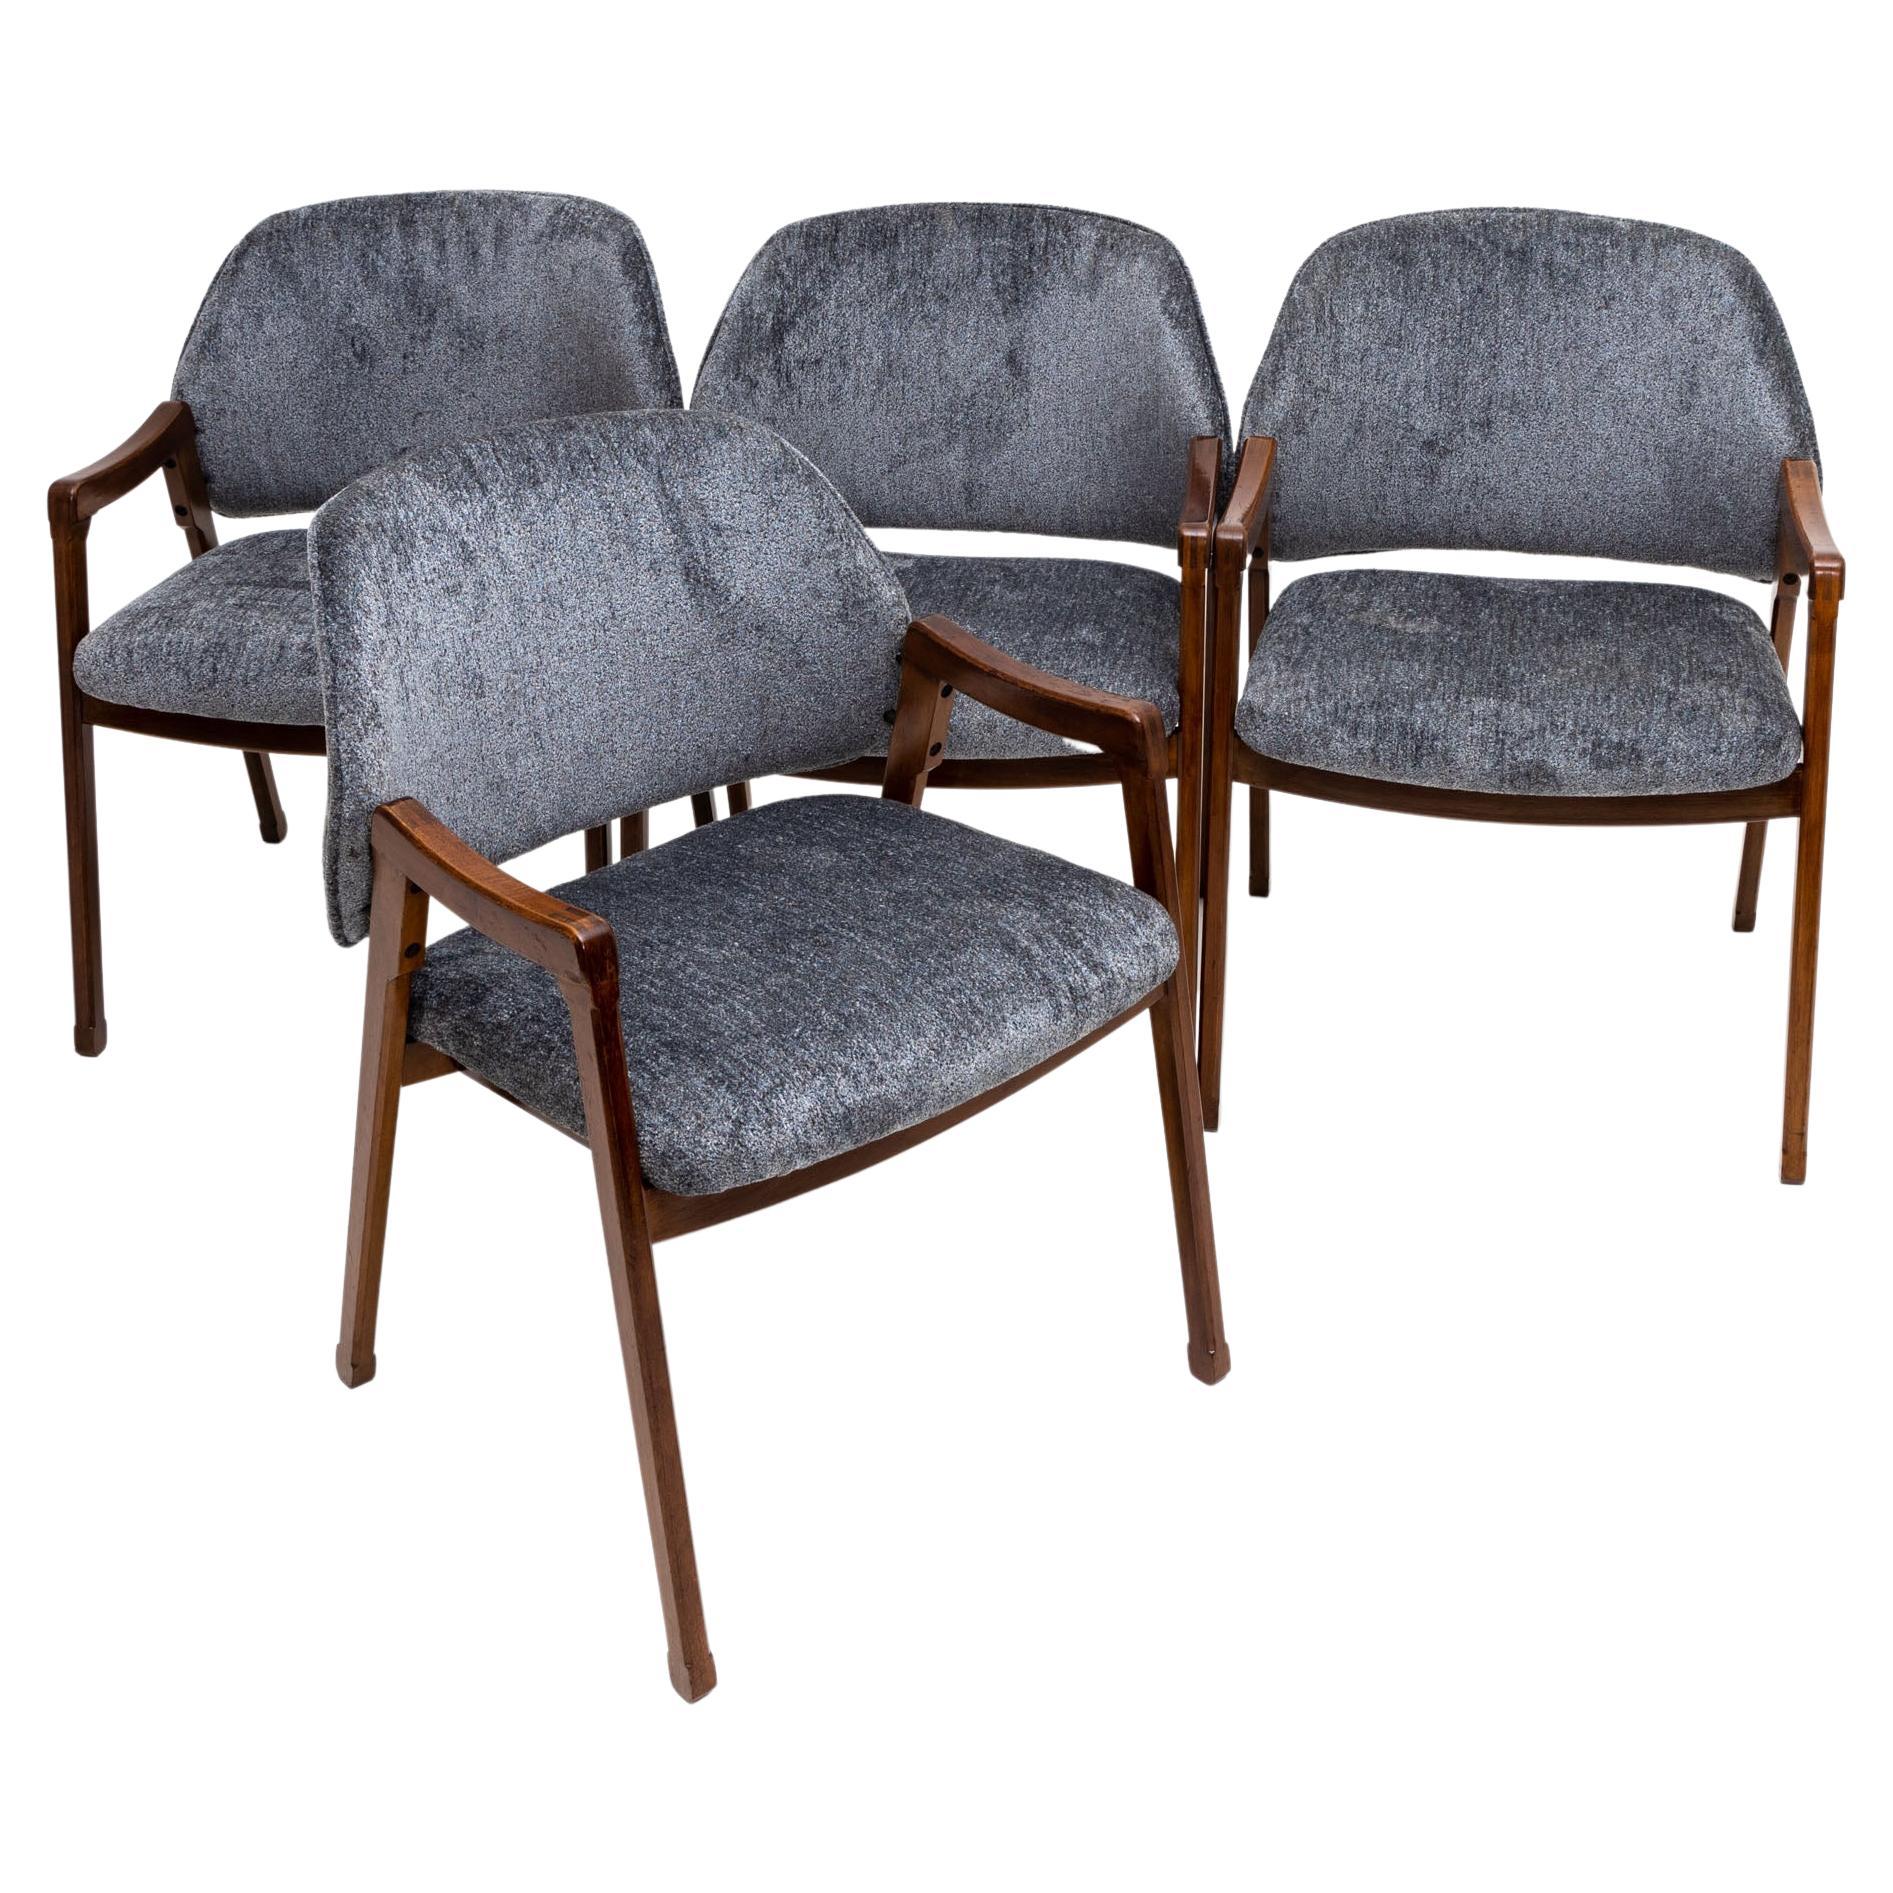 Armchairs Model 814 by Parisi, Italy, designed in at